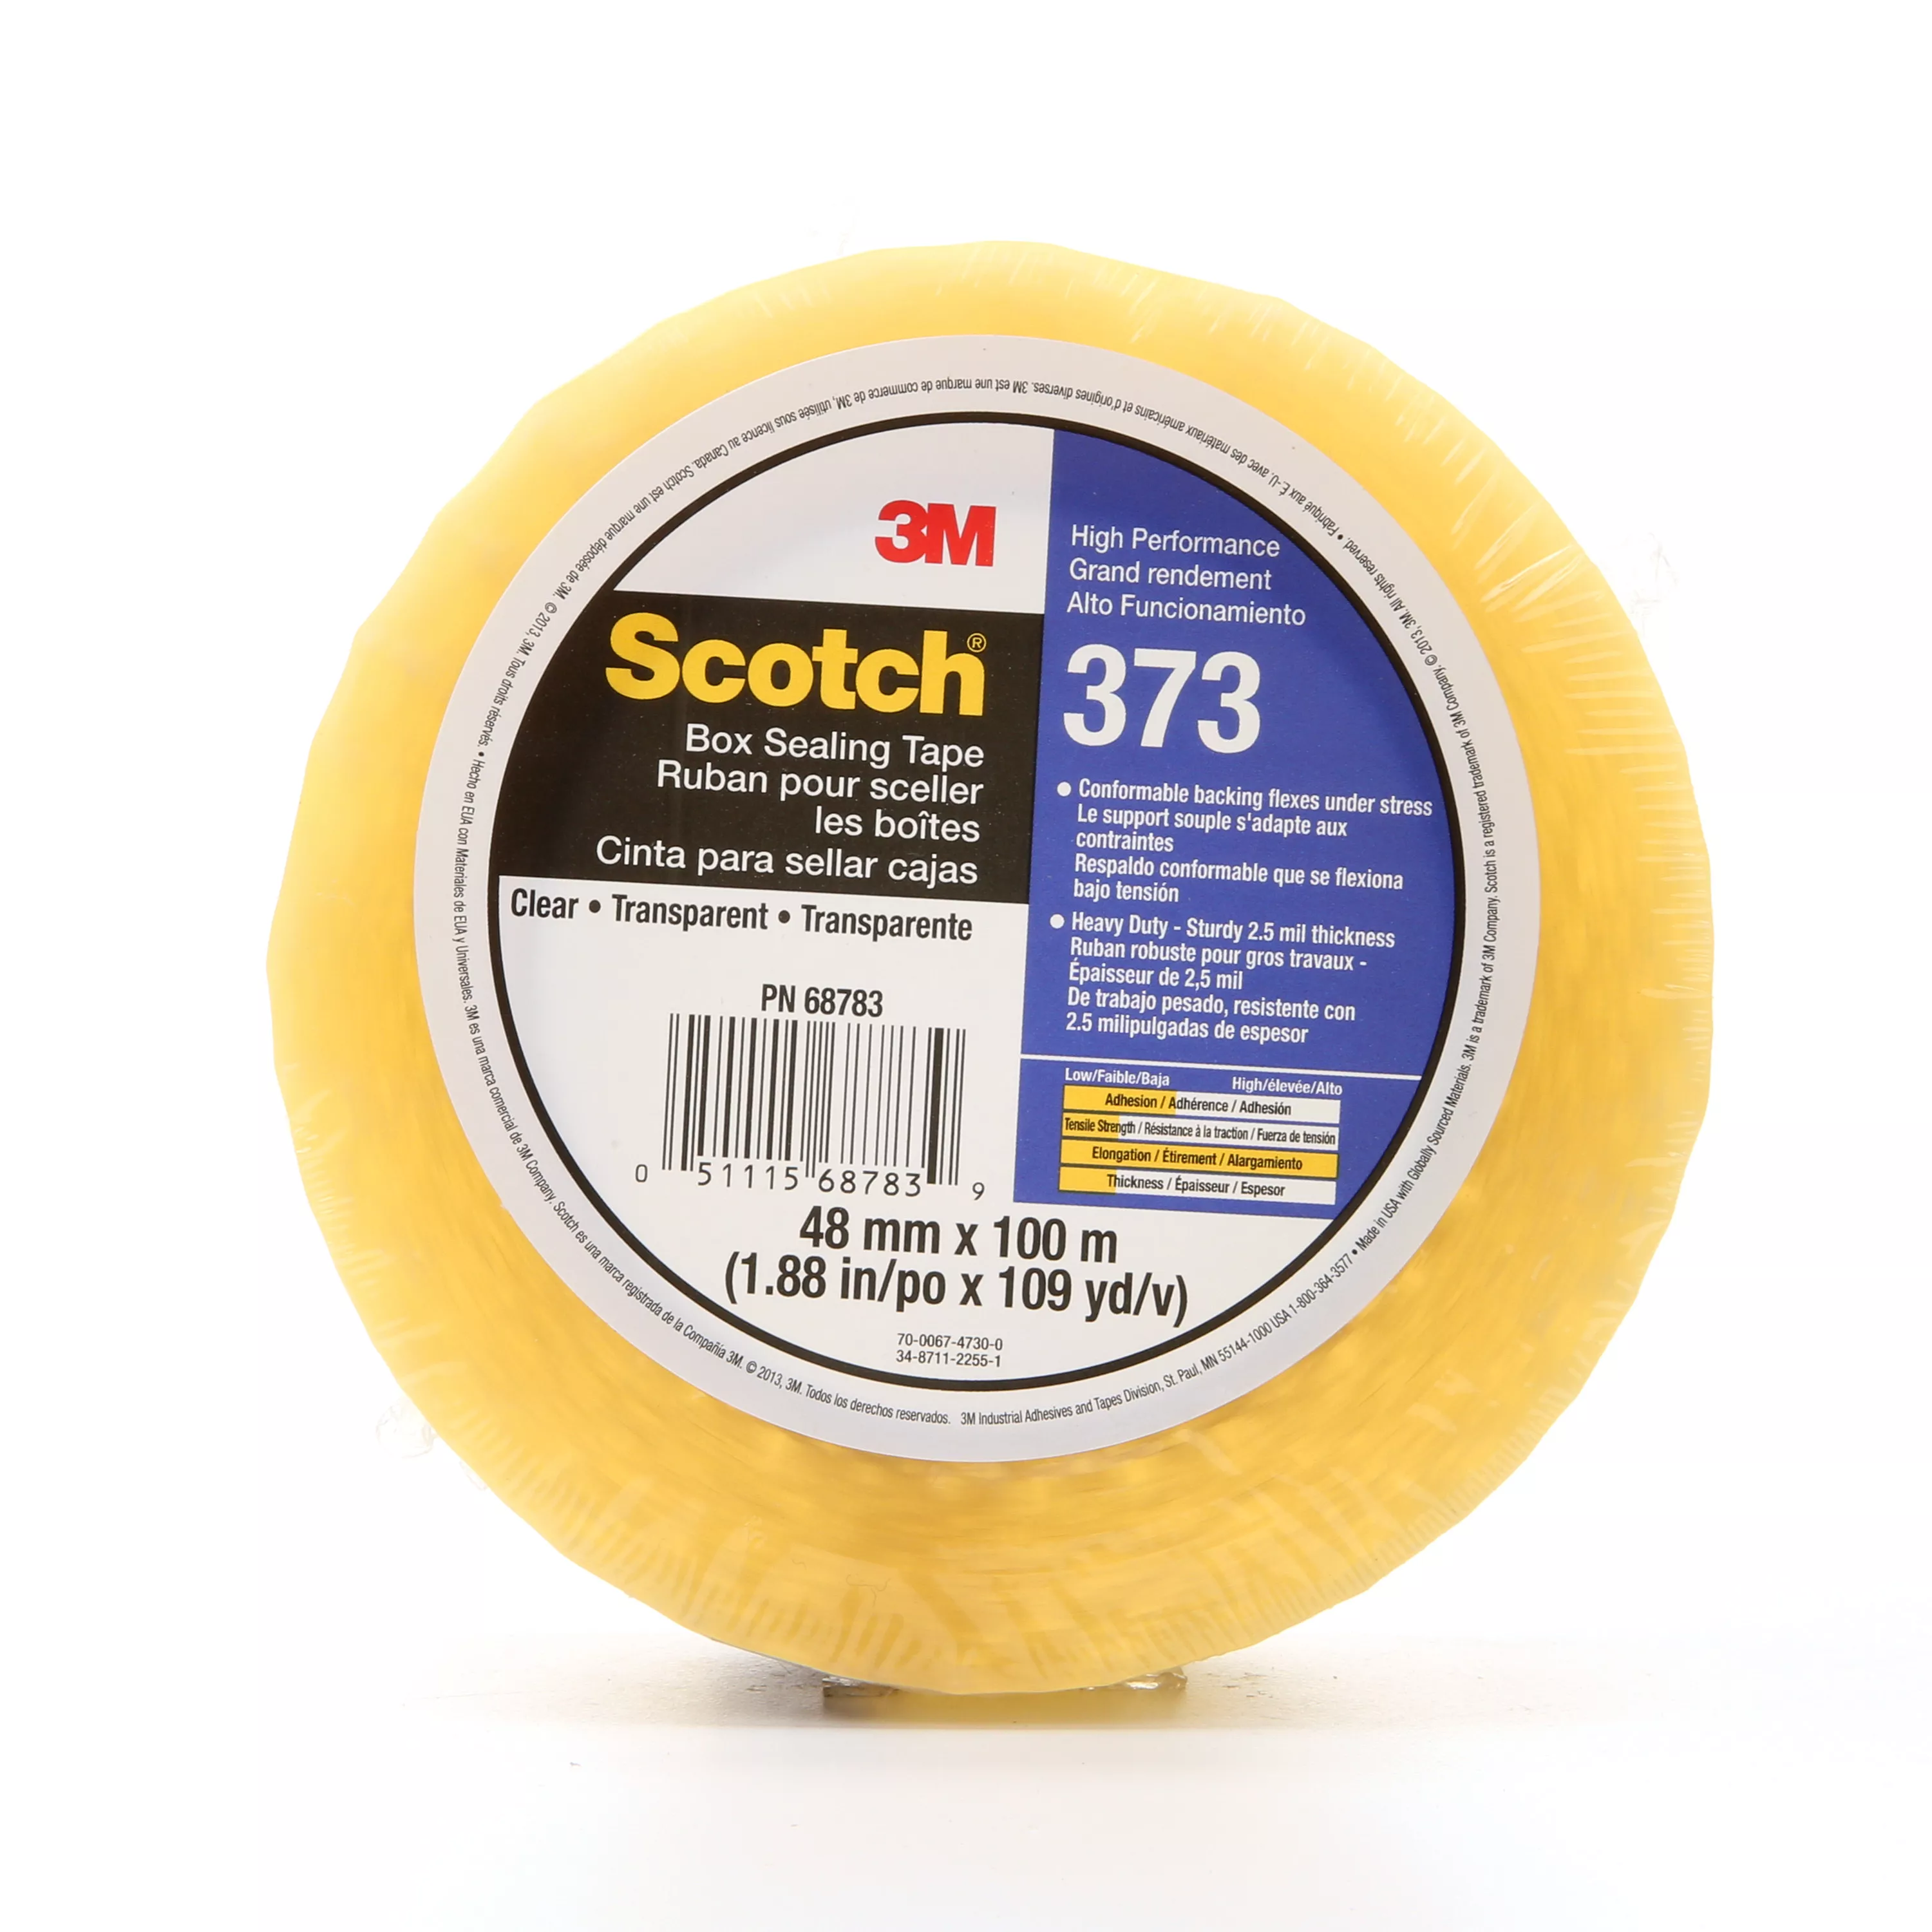 Scotch® Box Sealing Tape 373, Clear, 48 mm x 100 m, 36/Case,
Individually Wrapped Conveniently Packaged